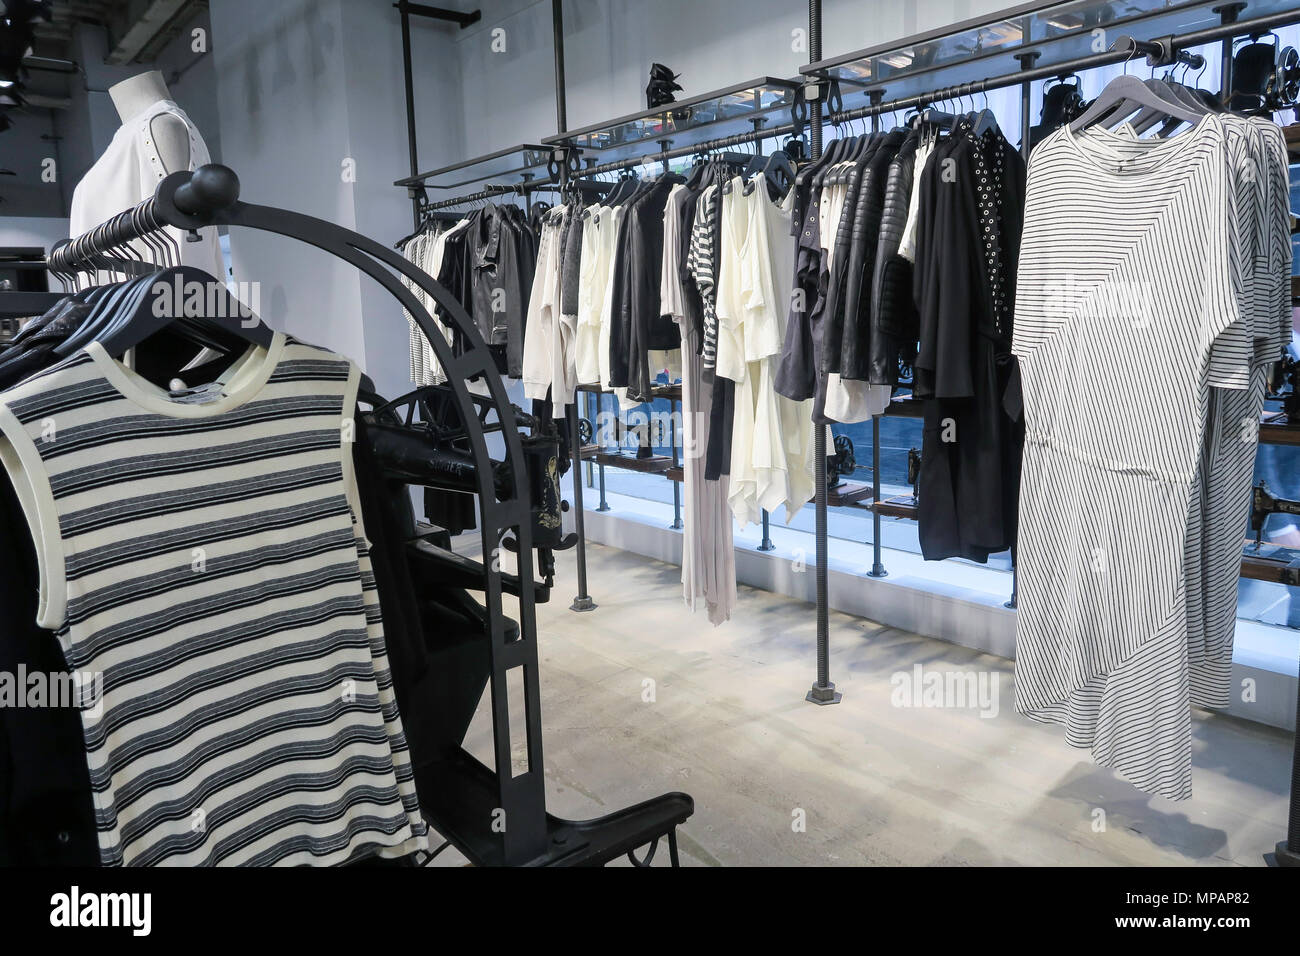 Allsaints Clothing Store High Resolution Stock Photography and Images -  Alamy